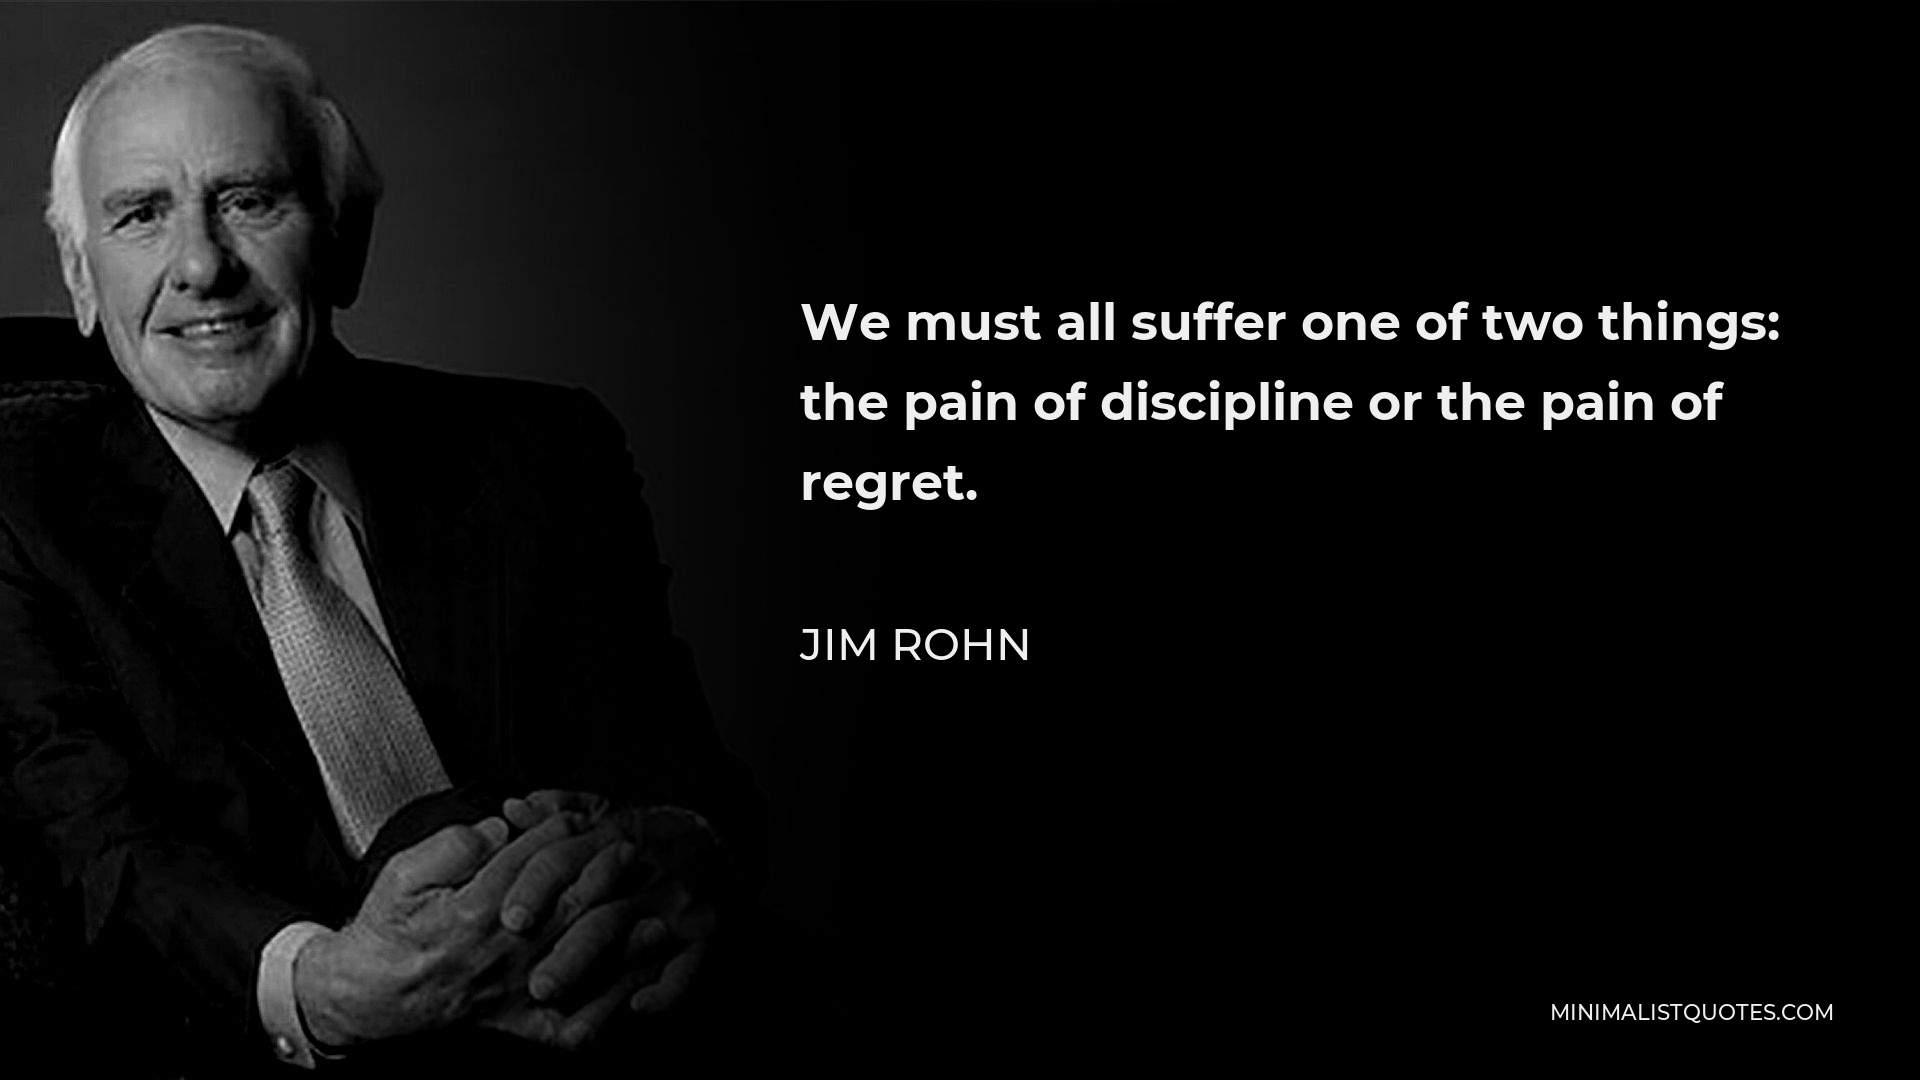 Jim Rohn Quote - We must all suffer one of two things: the pain of discipline or the pain of regret.